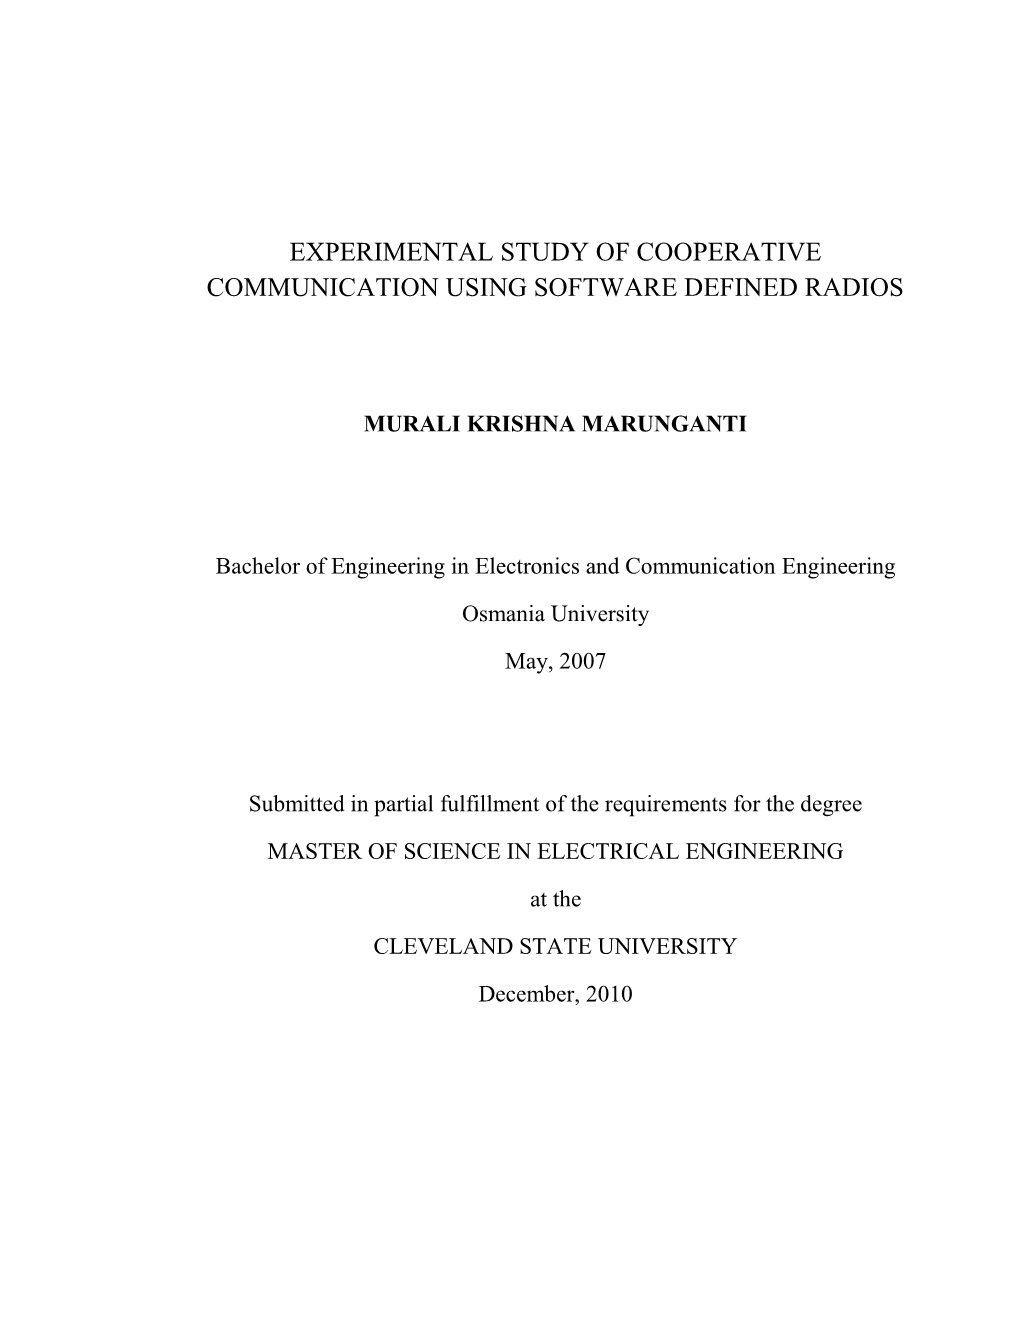 Experimental Study of Cooperative Communication Using Software Defined Radios